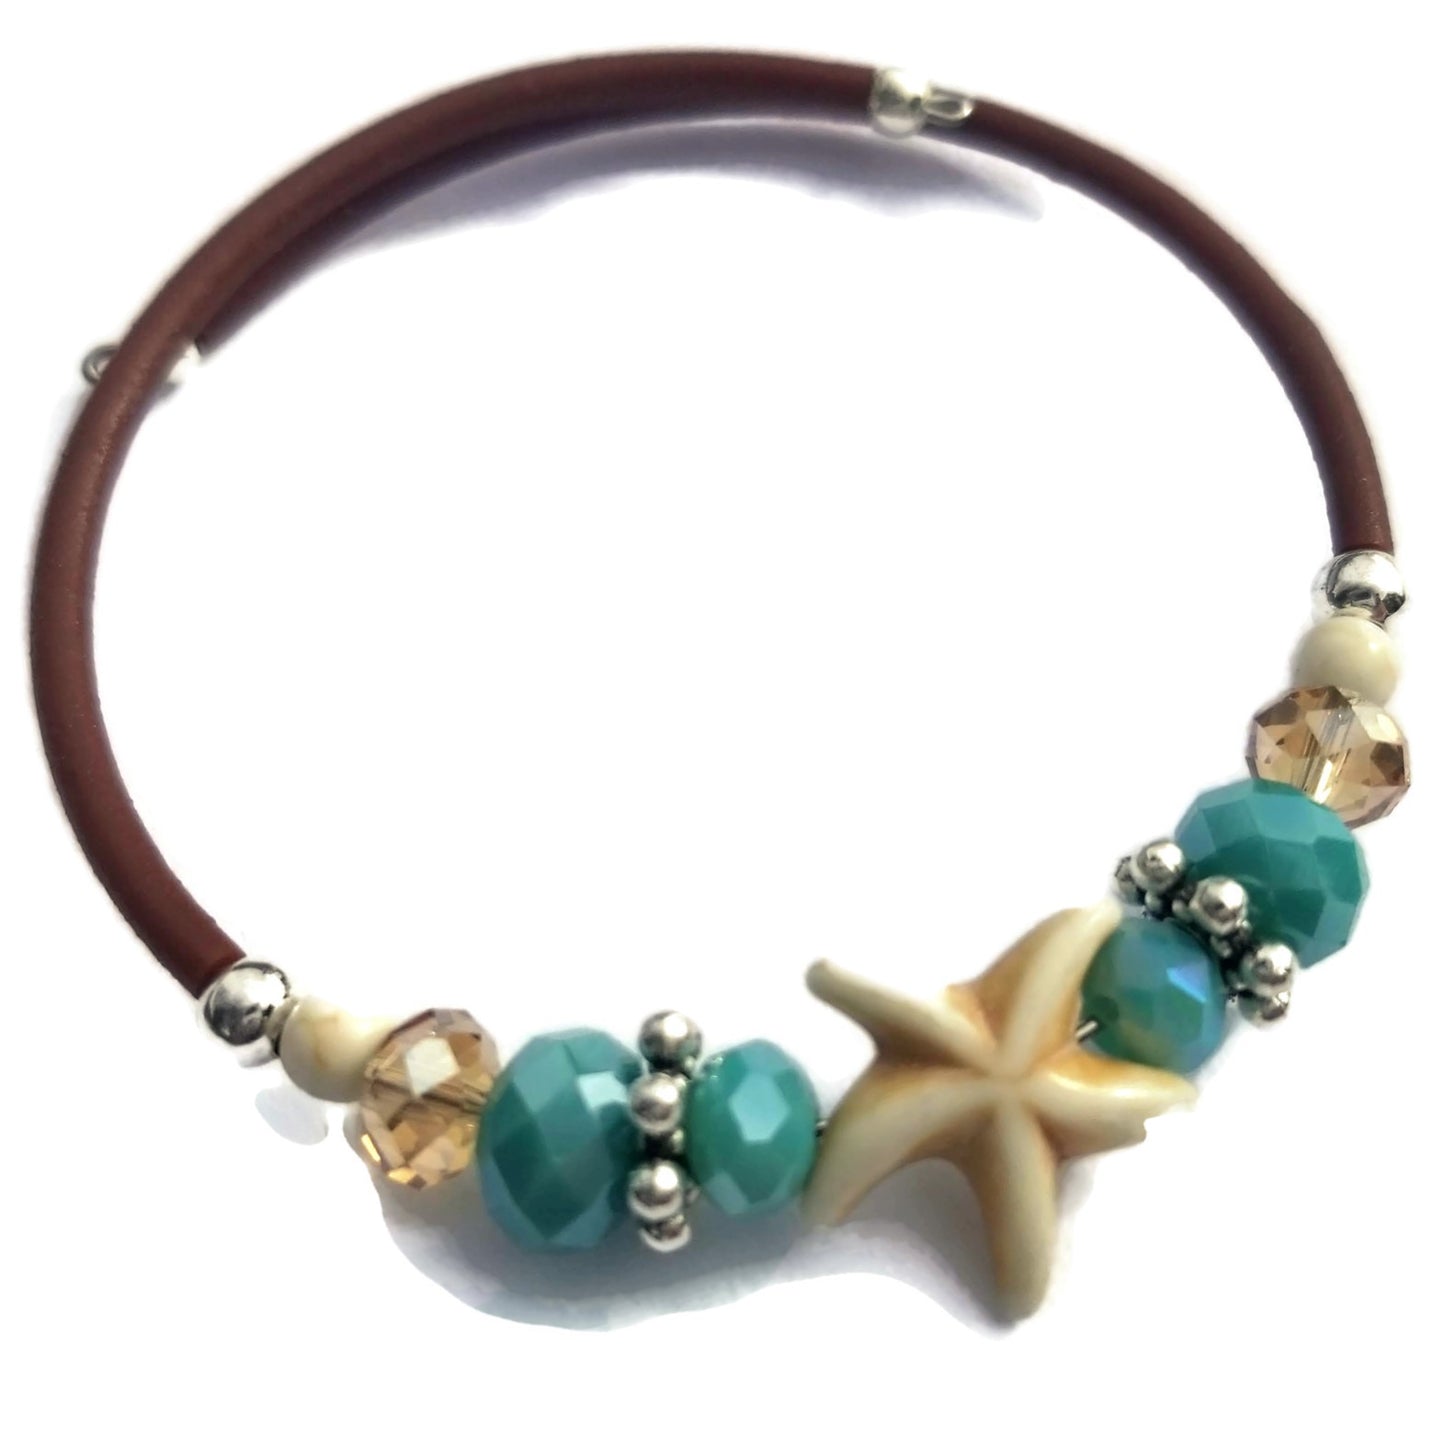 Wrap Bracelet - Bone color resin starfish bead with mix aqua and sandy colored beads